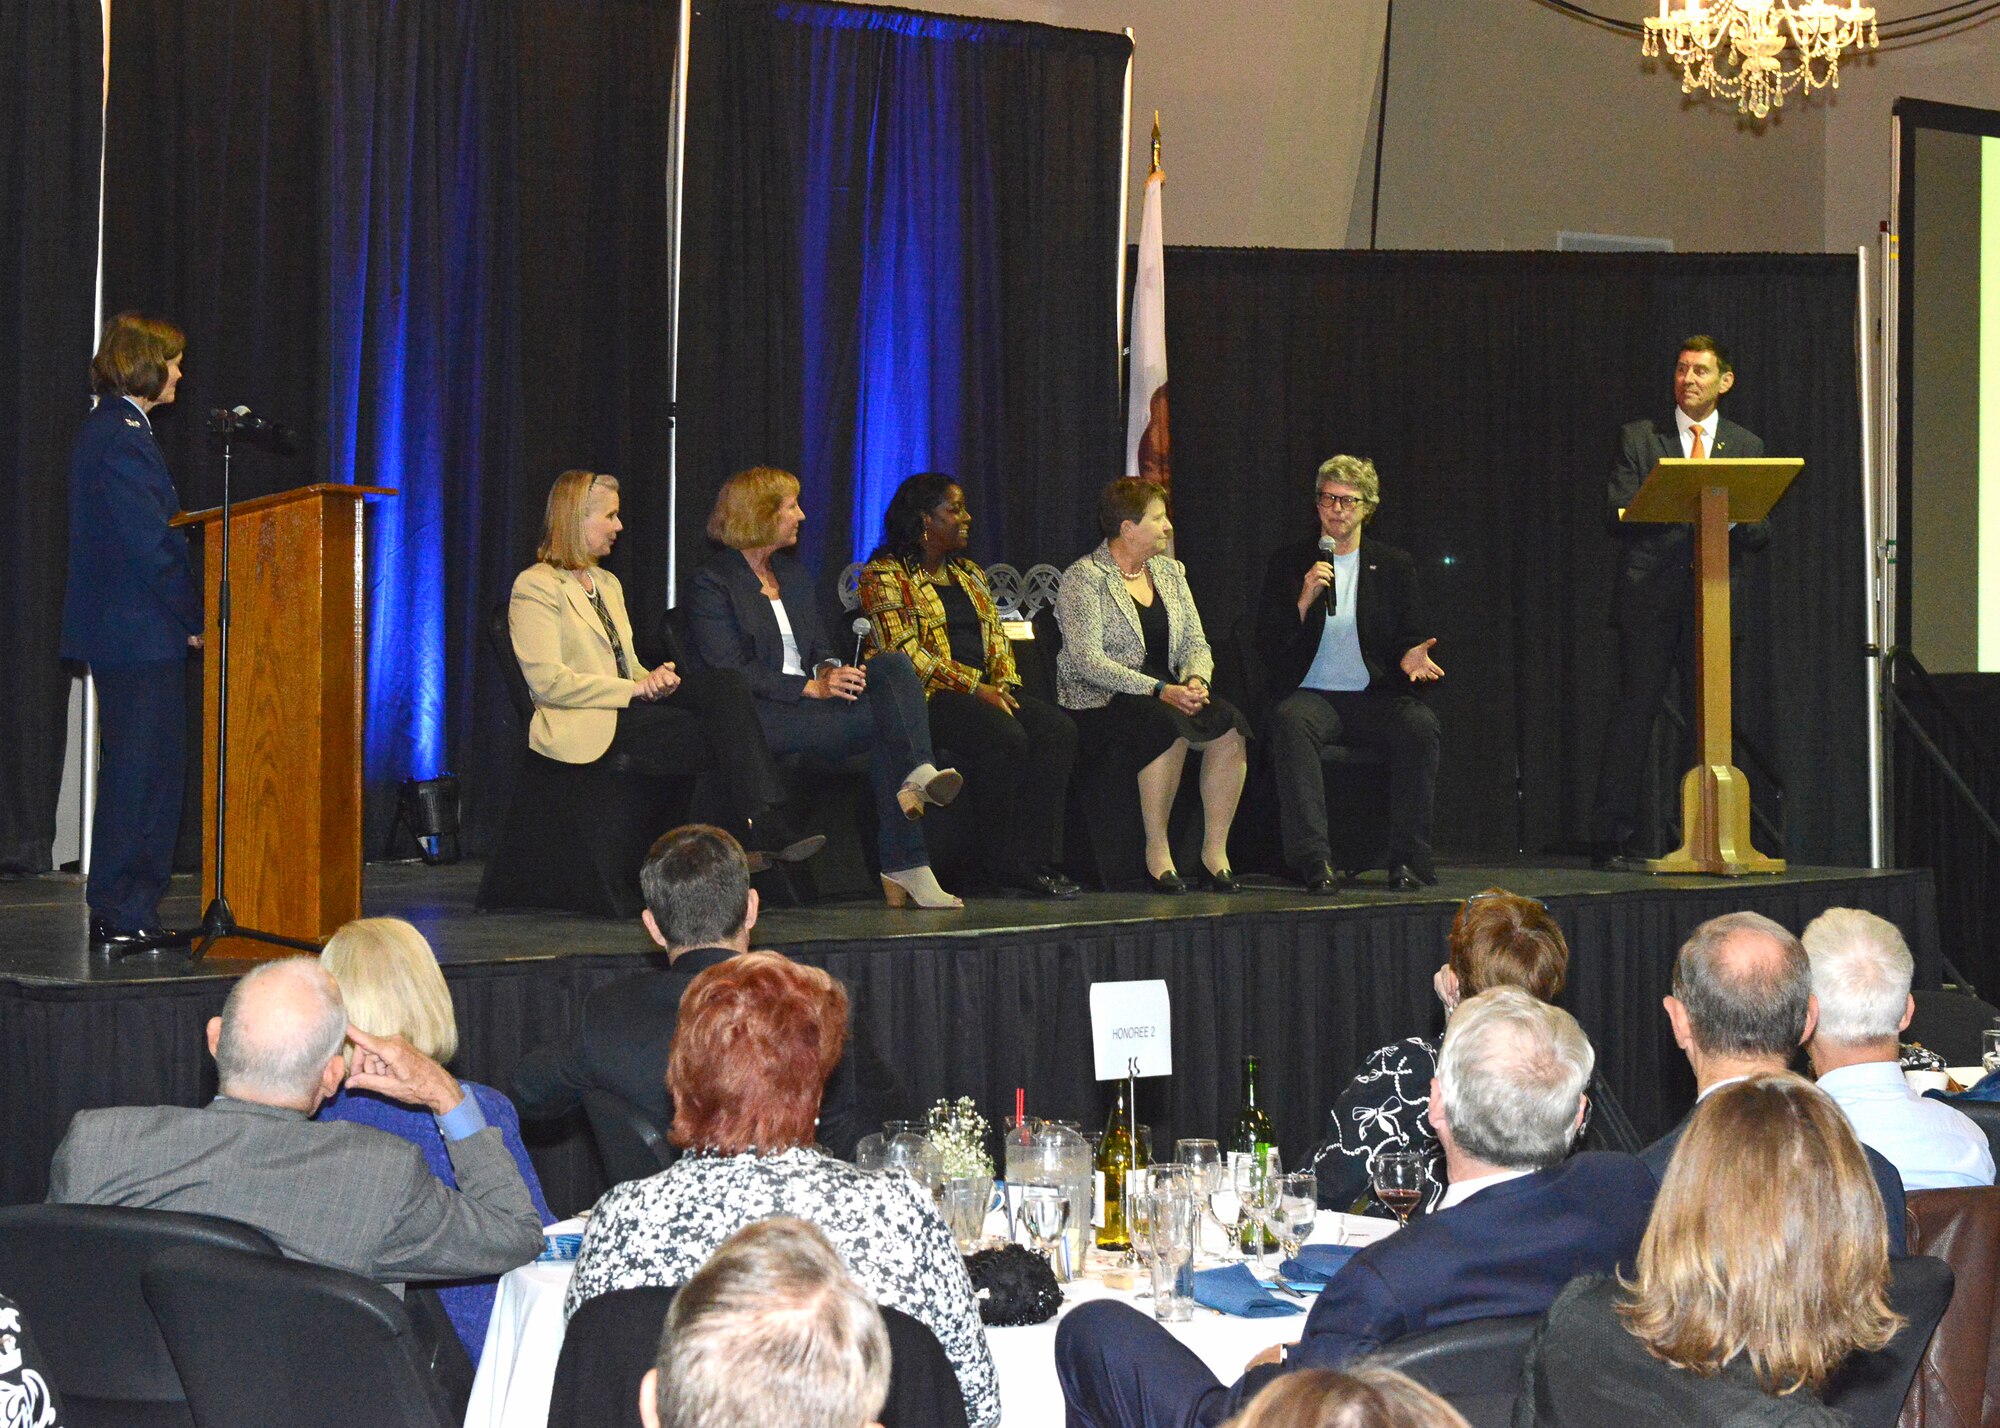 Bill Gray, U.S. Air Force Test Pilot School chief test pilot (far right), emceed the annual Gathering of Eagles event hosted by the Flight Test Historical Foundation Oct. 13 at the Antelope Valley Fairgrounds. Following dinner service and a silent auction, Col. Angela Suplisson, Air Force Test Center vice commander (far left), moderated a question and answer panel with the eagles. From left to right, the panel of eagles are: Dr. Sandy Miarecki, Kelly Latimer, Laurie Grindle, Dr. Eileen Bjorkman and Cynthia Bixby. (U.S. Air Force photo by Kenji Thuloweit)